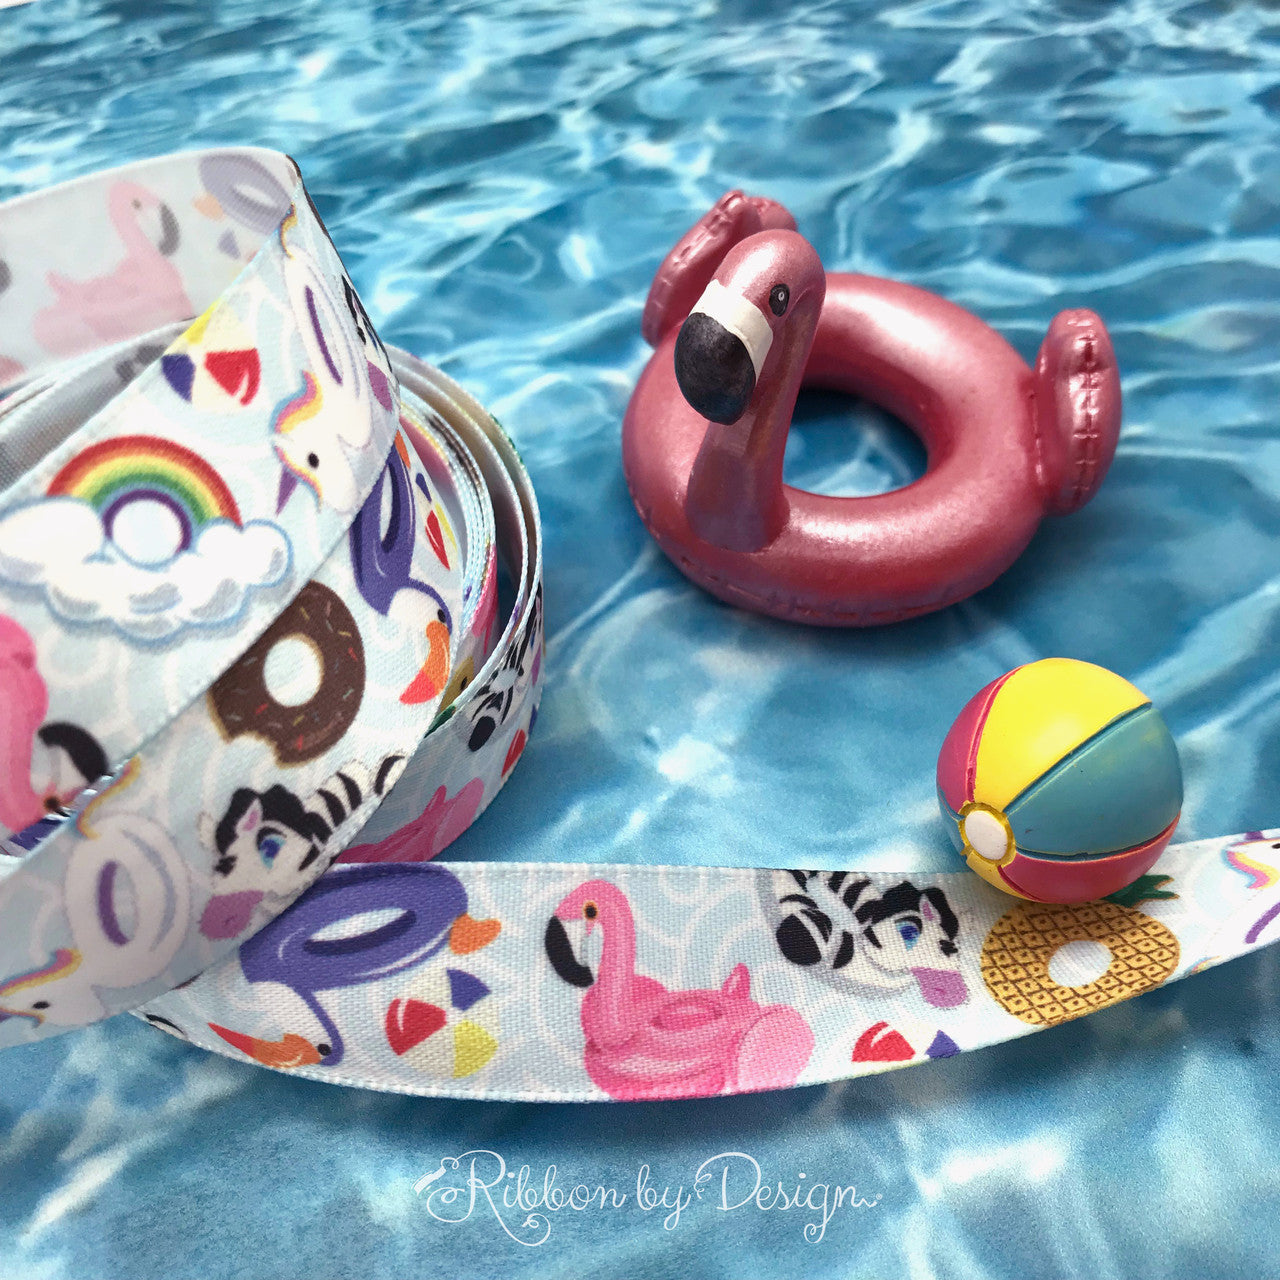 Make the favors at your pool party really pop with our pool float ribbon! Our ribbon is 5/8" wide printed on white single face satin.